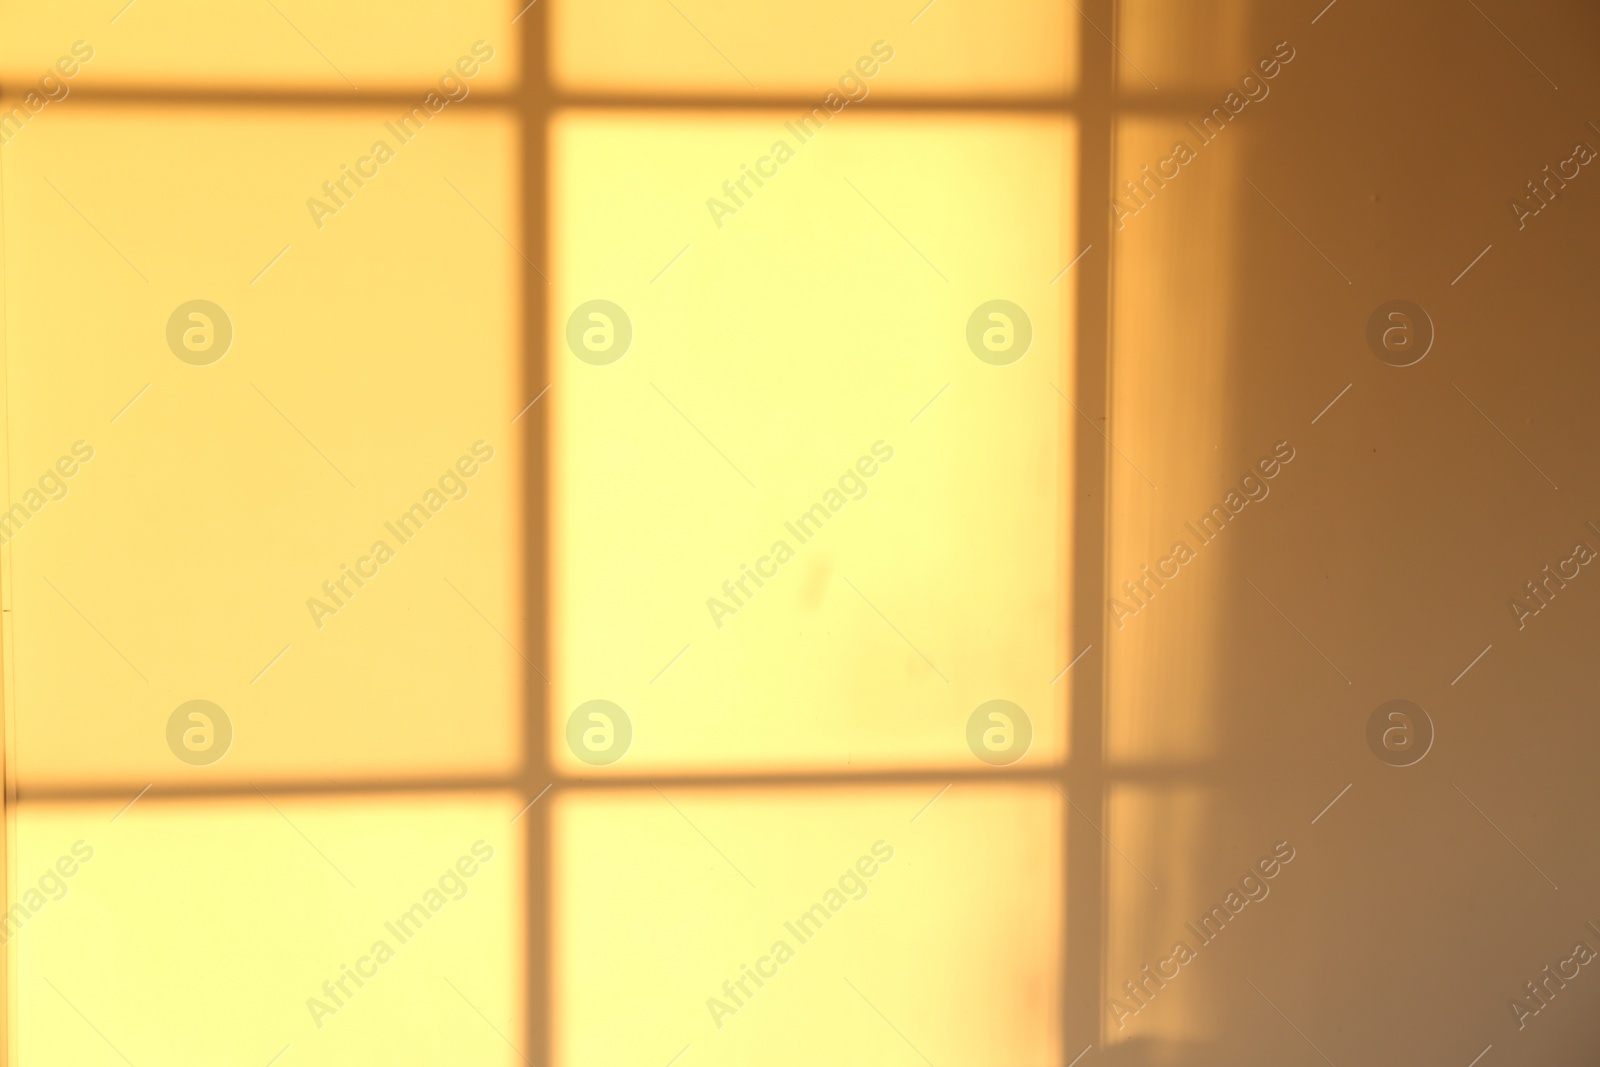 Photo of Light and shadow from window on wall